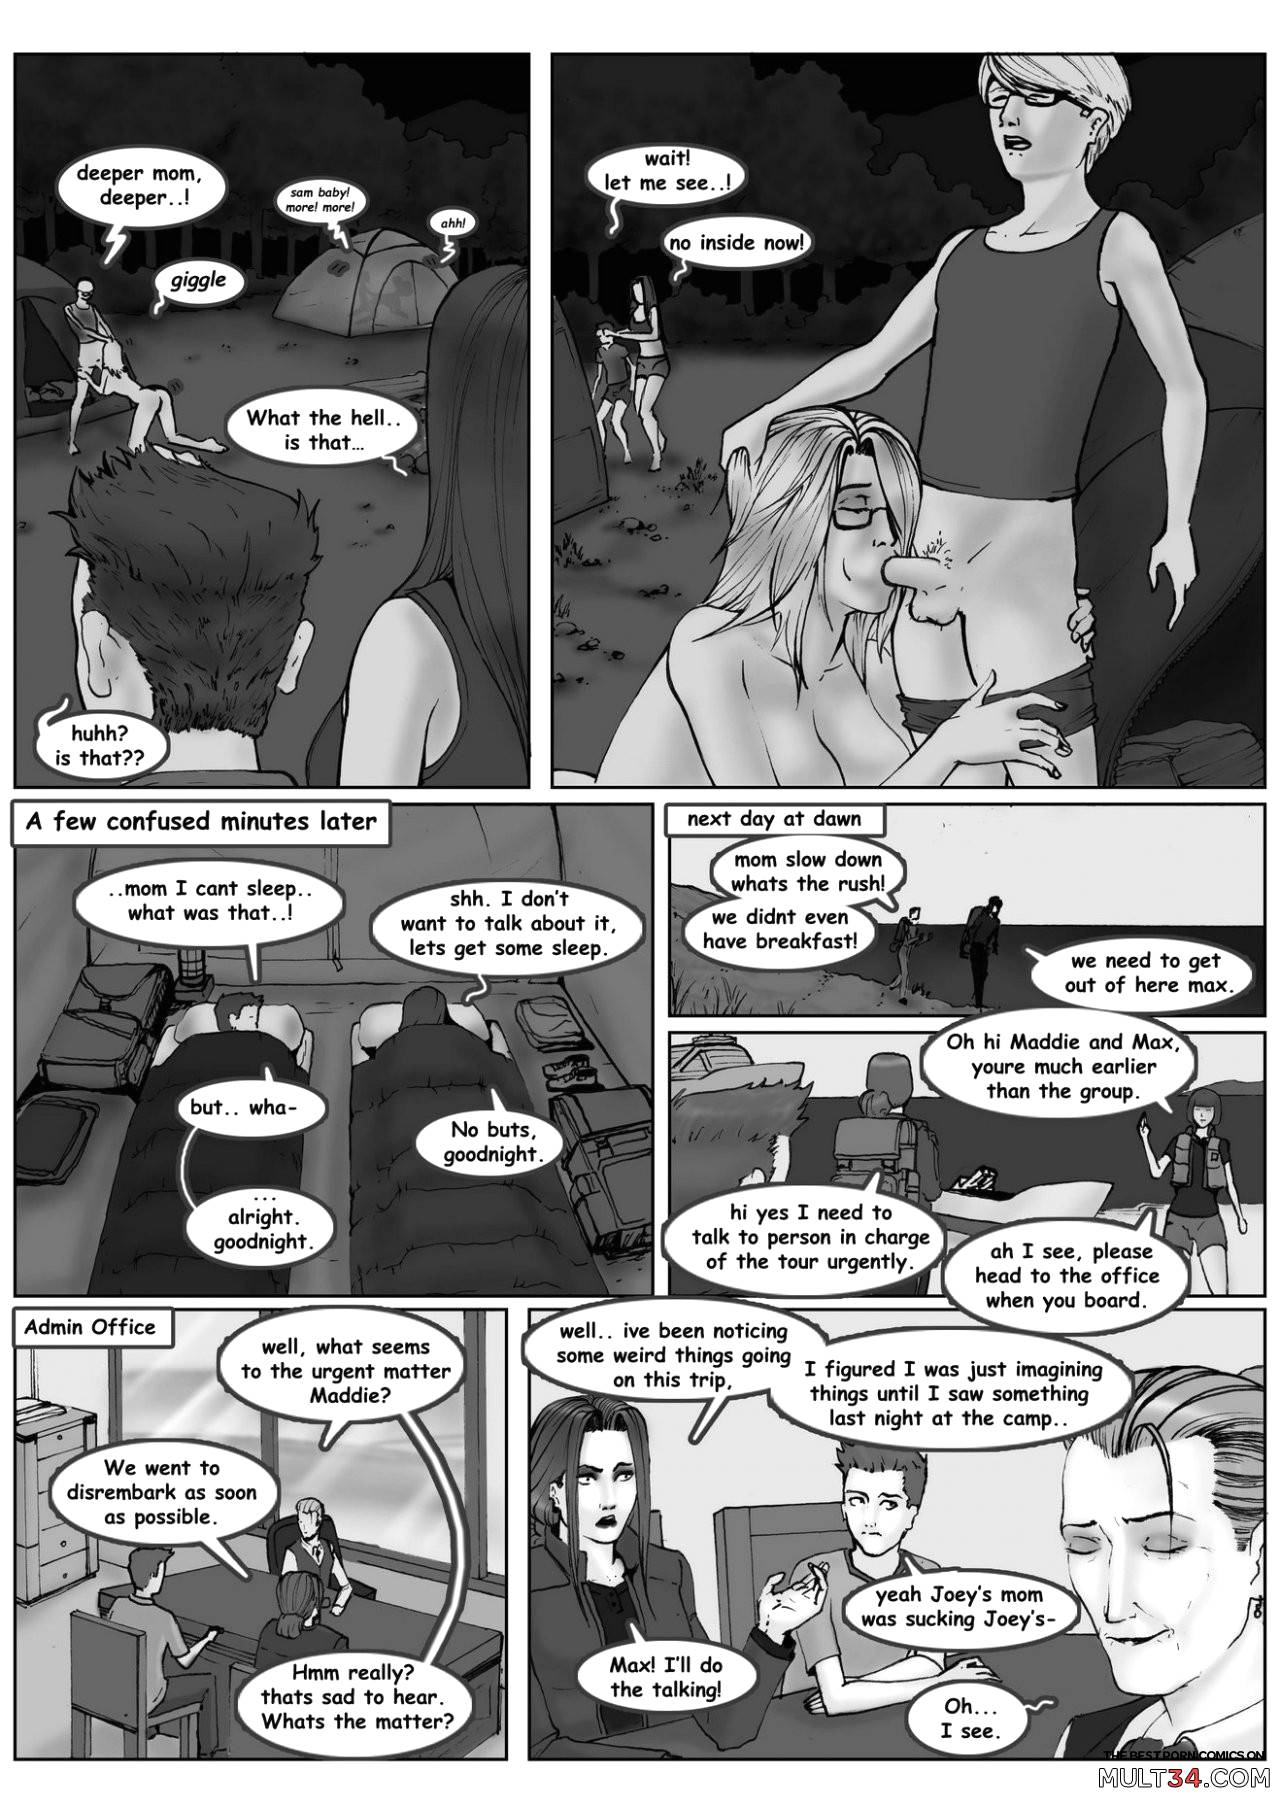 Max and Maddie's Island Quest: Part 1: Jocasta page 16